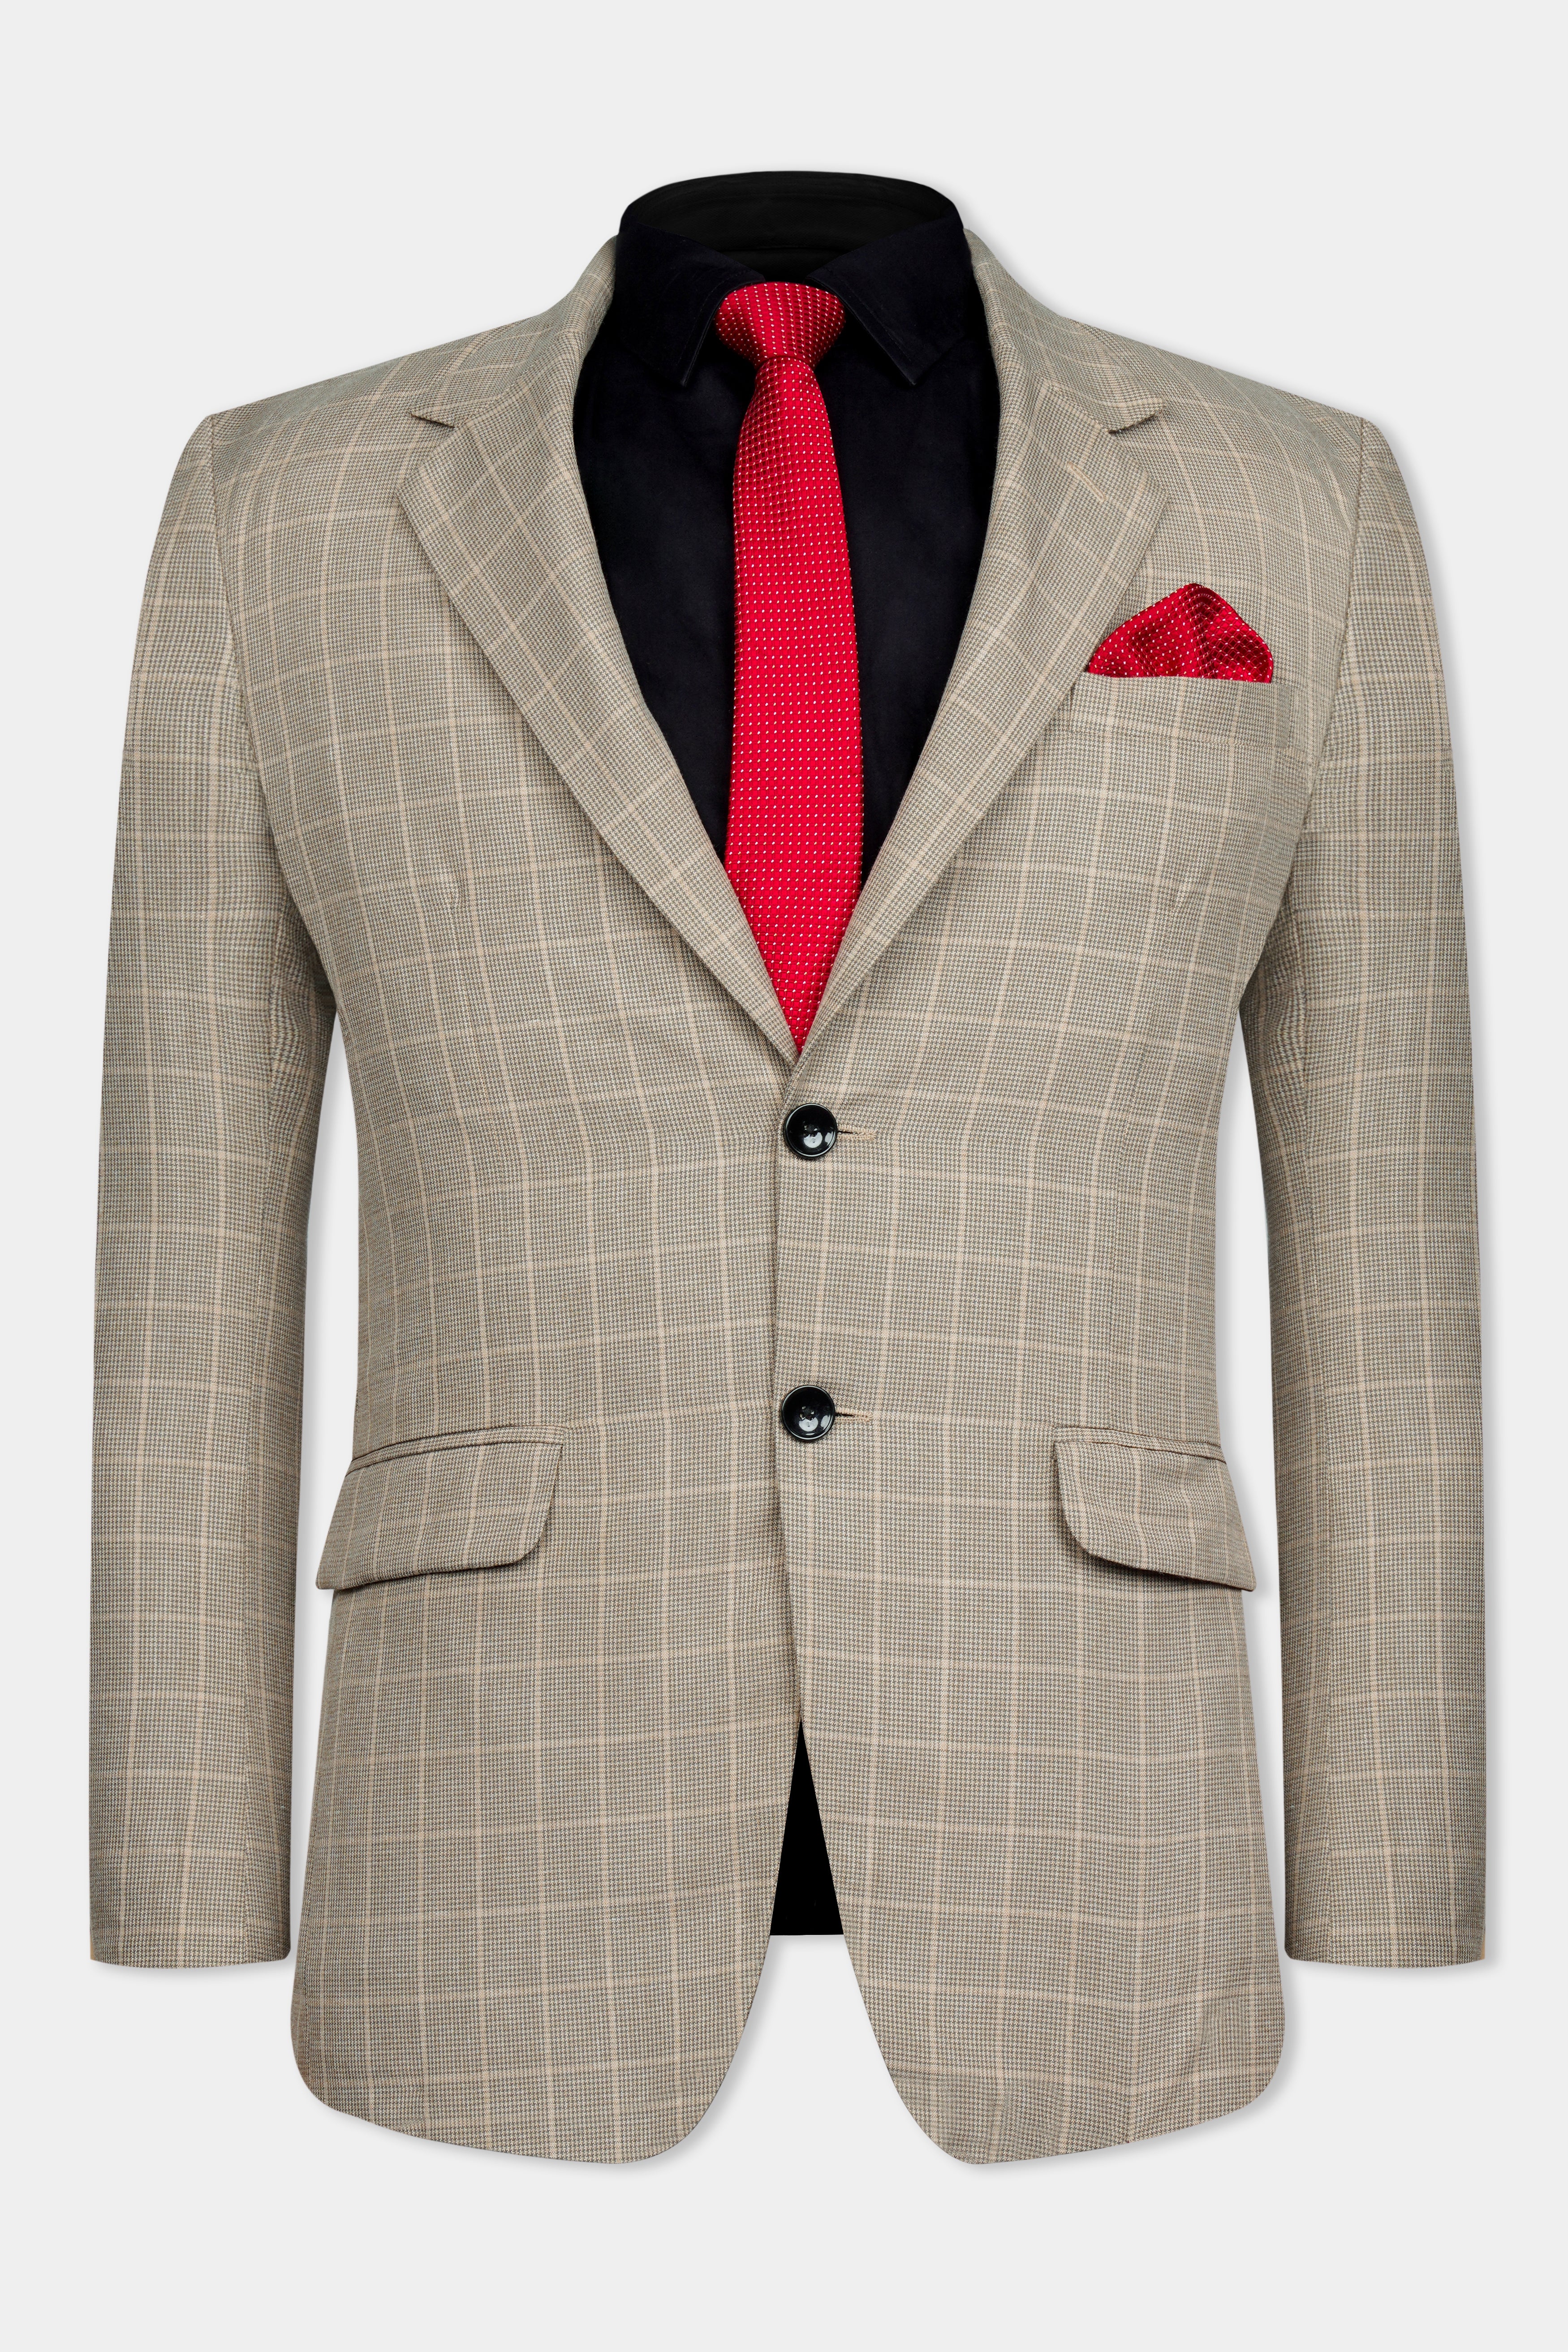 Apricot Brown Subtle Checkered Wool Rich Blazer BL3008-SB-36, BL3008-SB-38, BL3008-SB-40, BL3008-SB-42, BL3008-SB-44, BL3008-SB-46, BL3008-SB-48, BL3008-SB-50, BL3008-SB-52, BL3008-SB-54, BL3008-SB-56, BL3008-SB-58, BL3008-SB-60